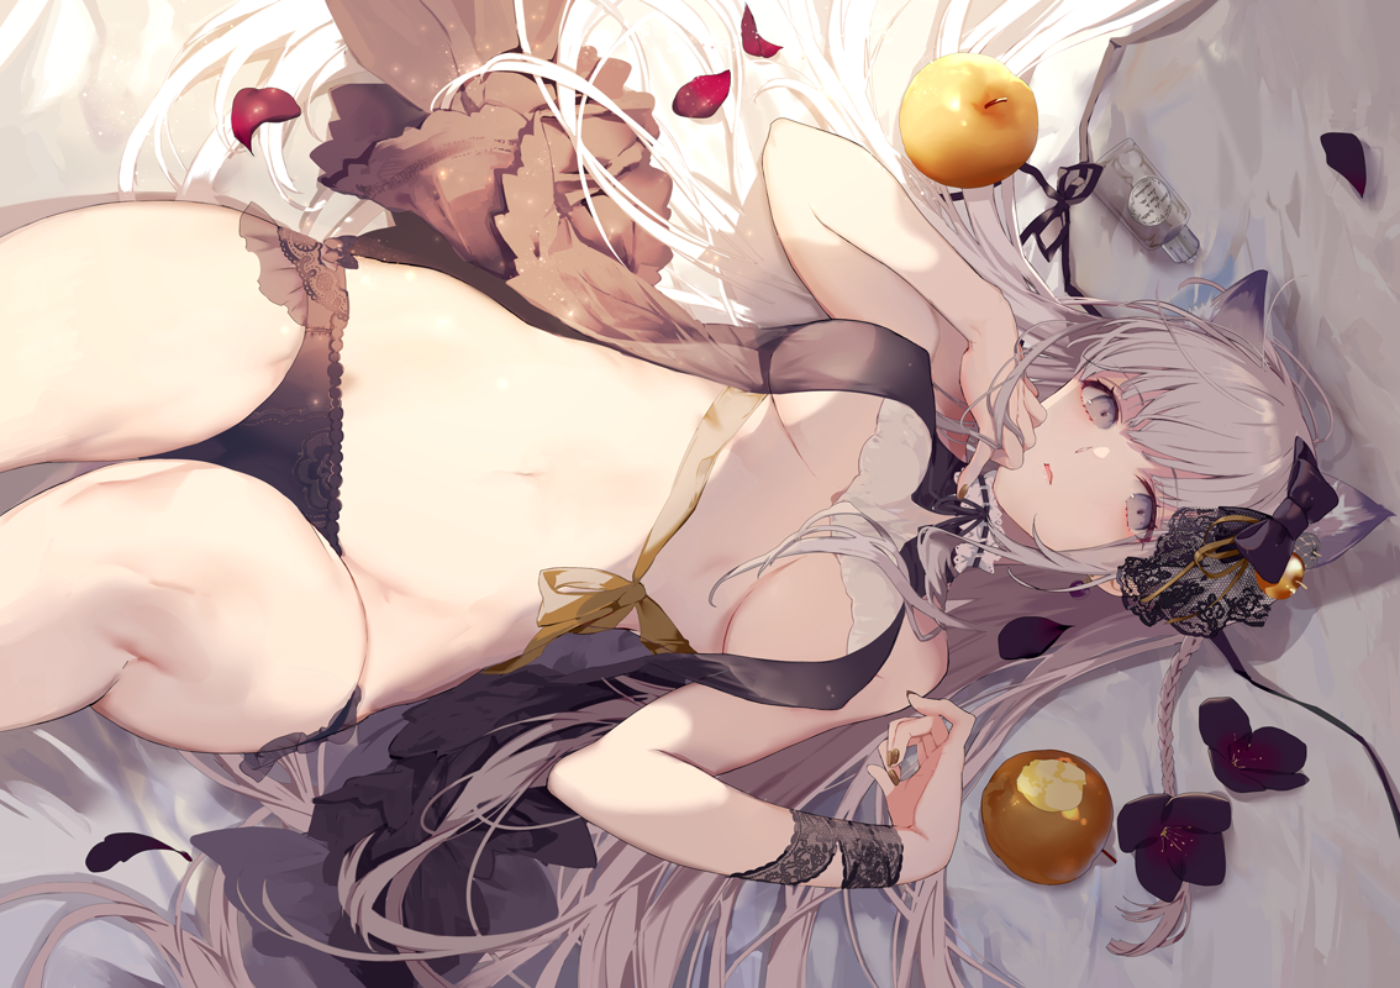 Anime 1400x988 anime anime girls lying on back cat girl cat ears feathers apples fruit big boobs long hair looking at viewer braids lingerie belly belly button petals flowers bow tie Yukisame top view black panties